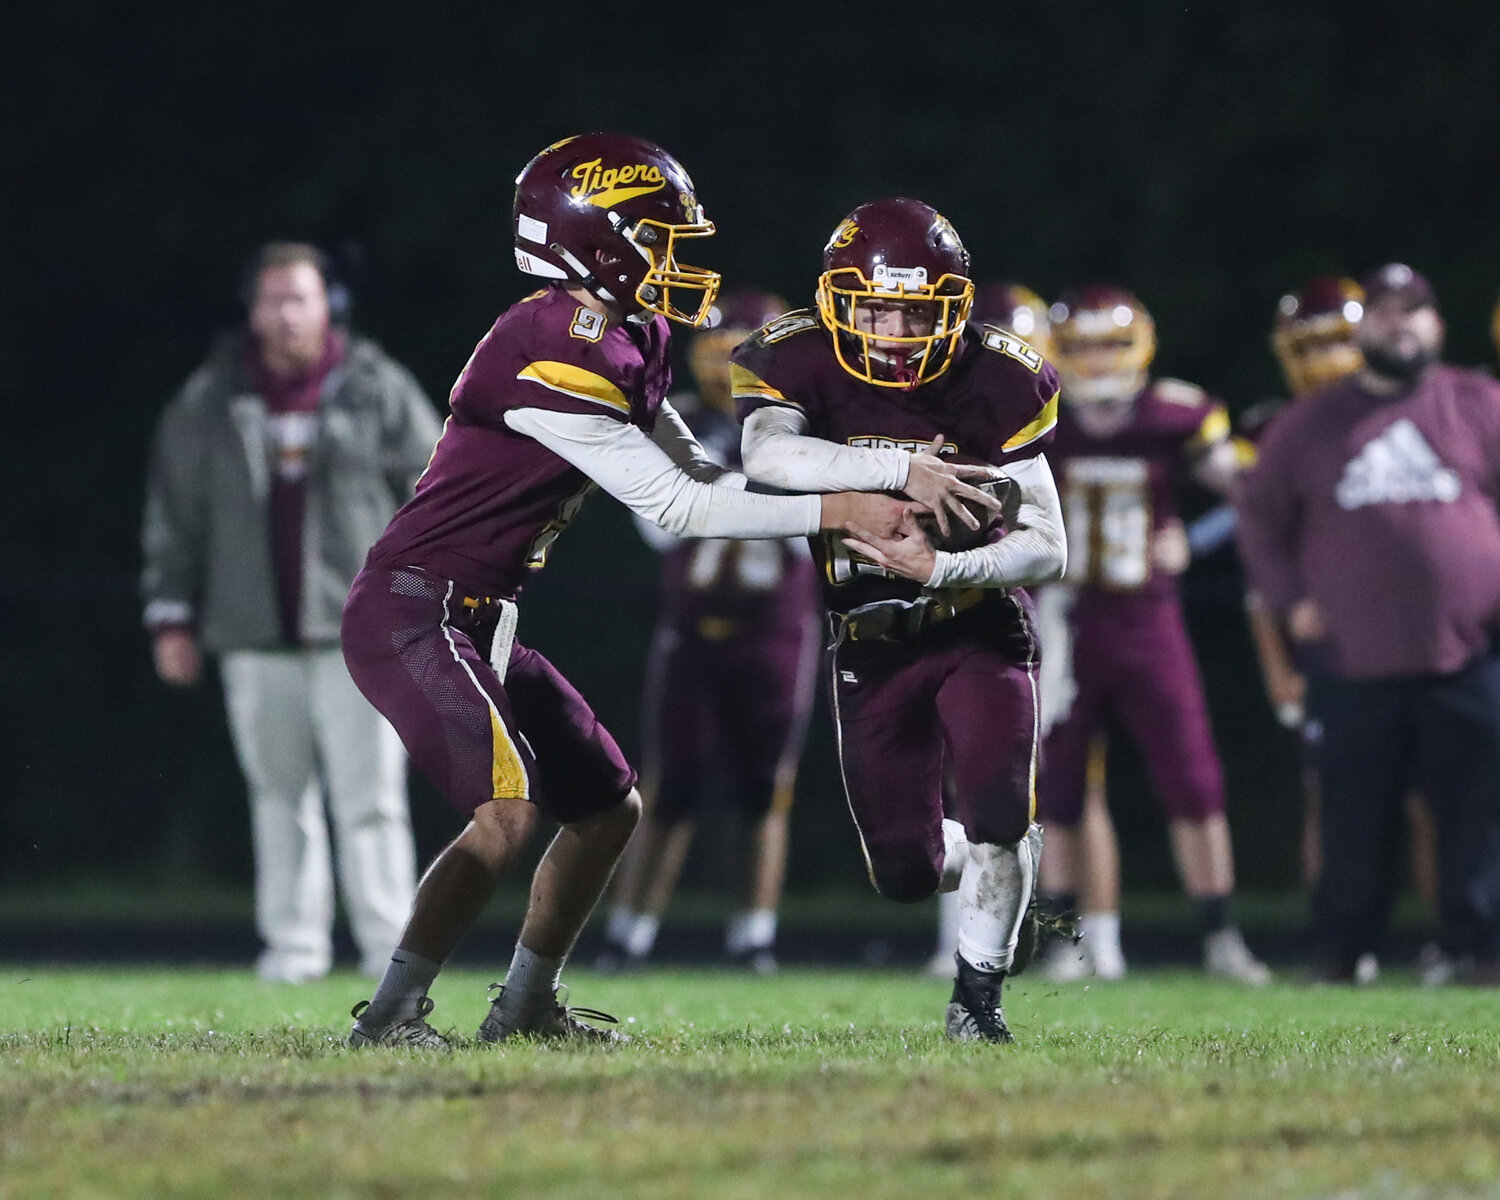 Quarterback Ben Troia (left) hands off to running back Evan Lapointe during the game.